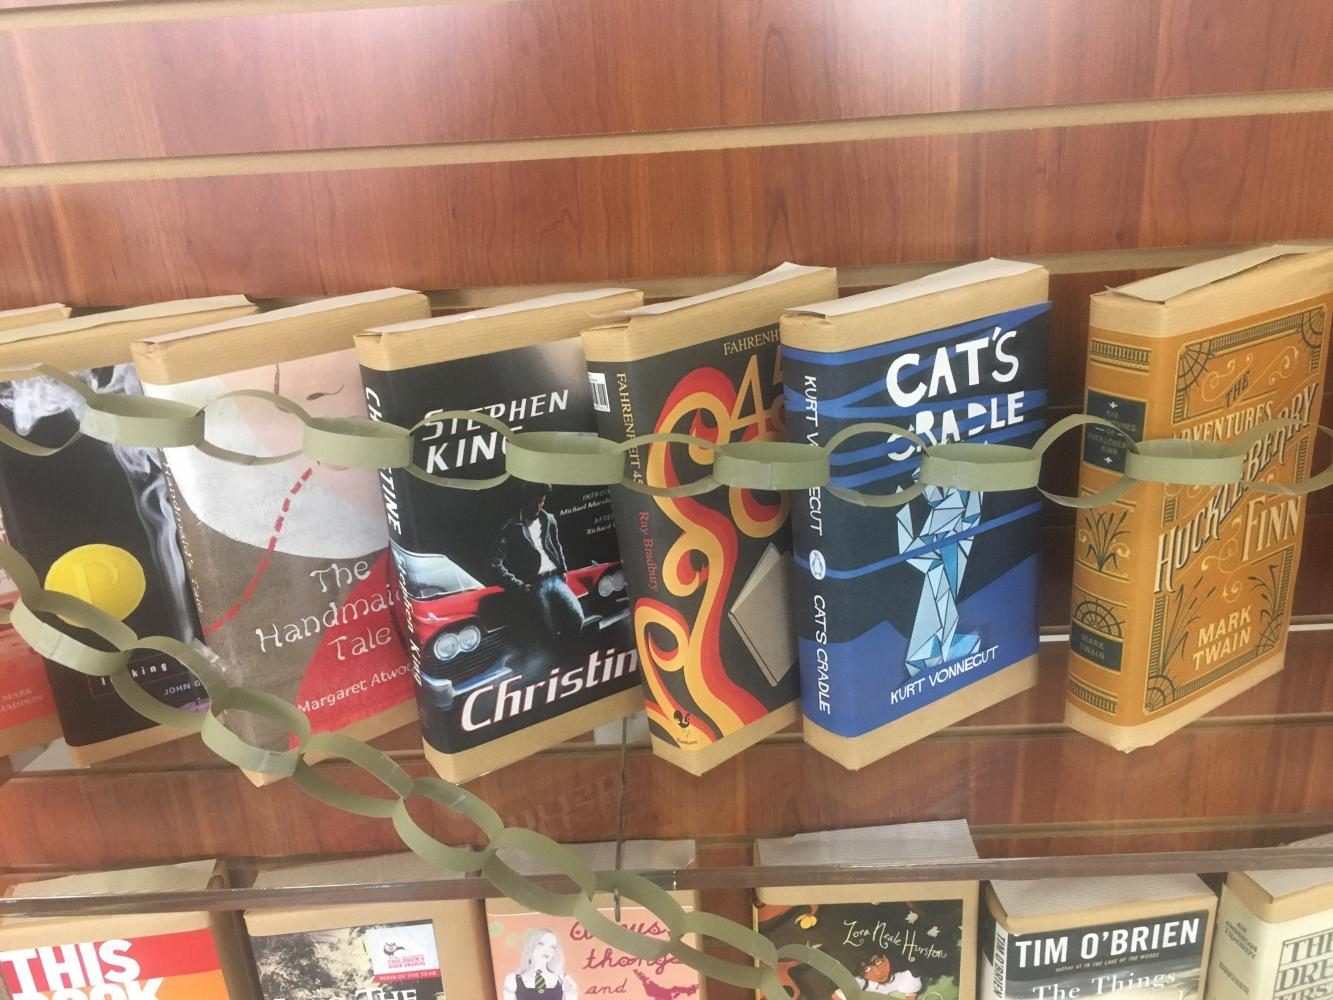 Banned novels are displayed in Meriam Library. Photo credit: Natalie Hanson